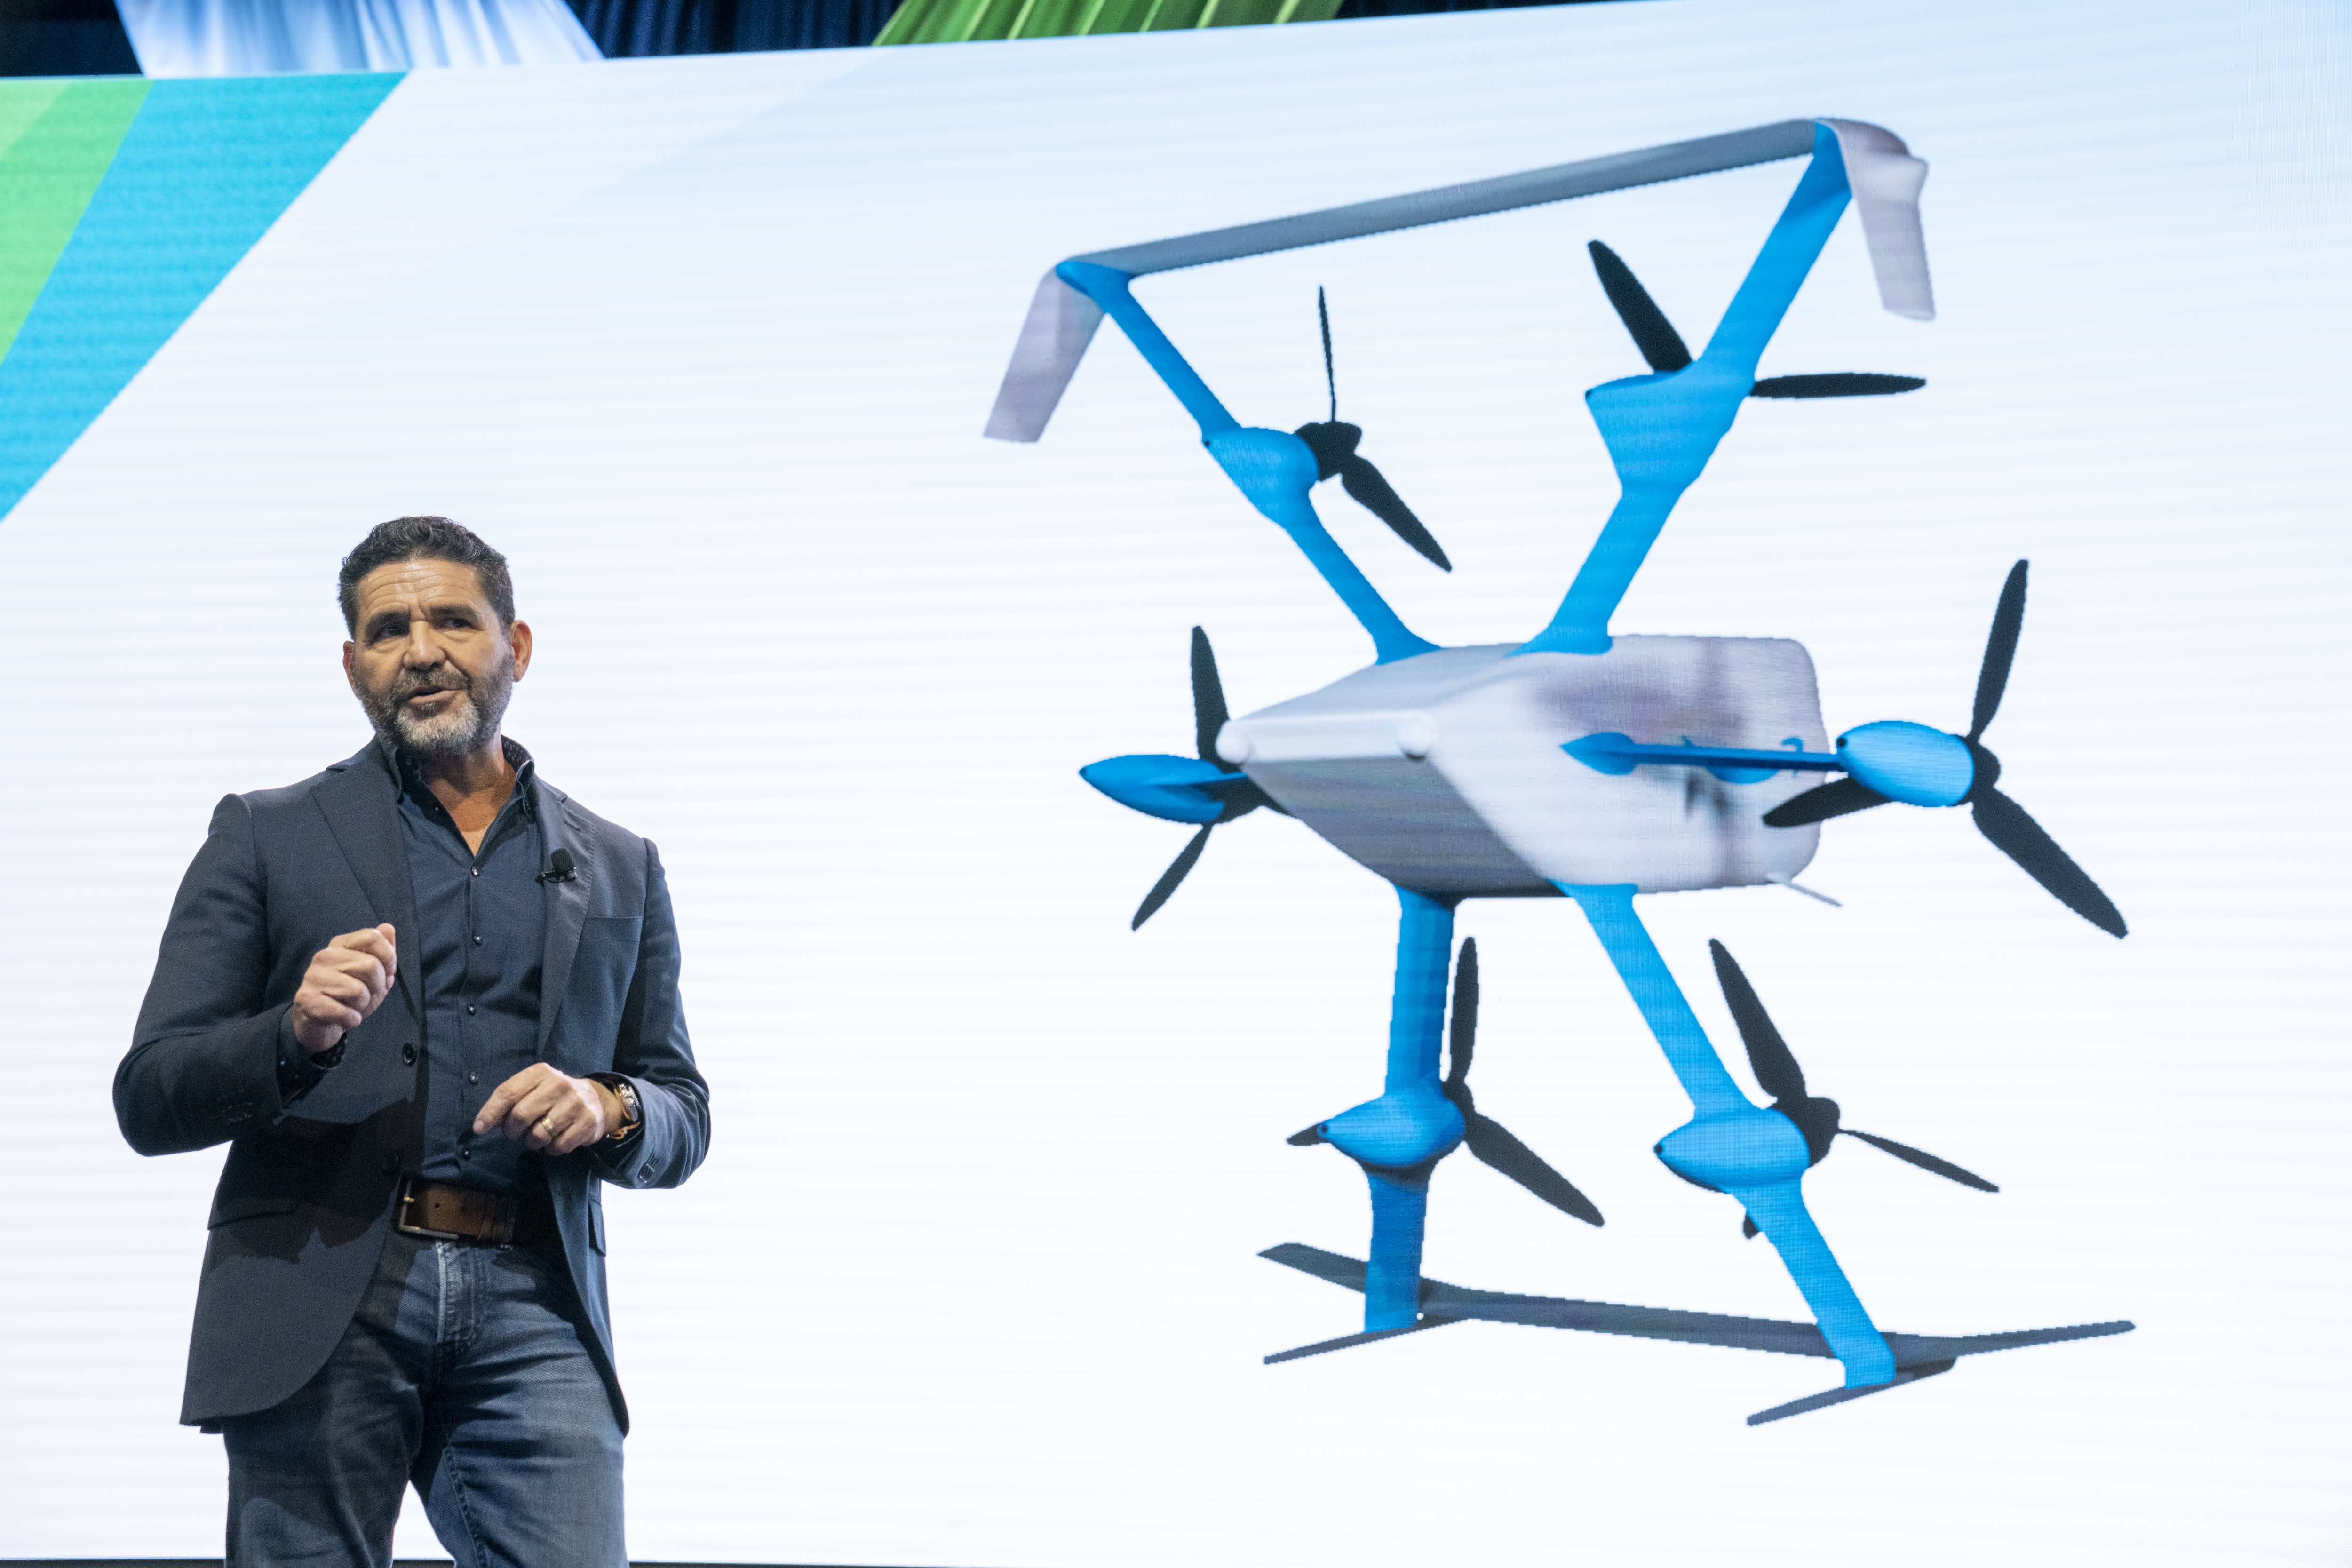 Amazon Prime Air drone business hampered by regulations, weak demand